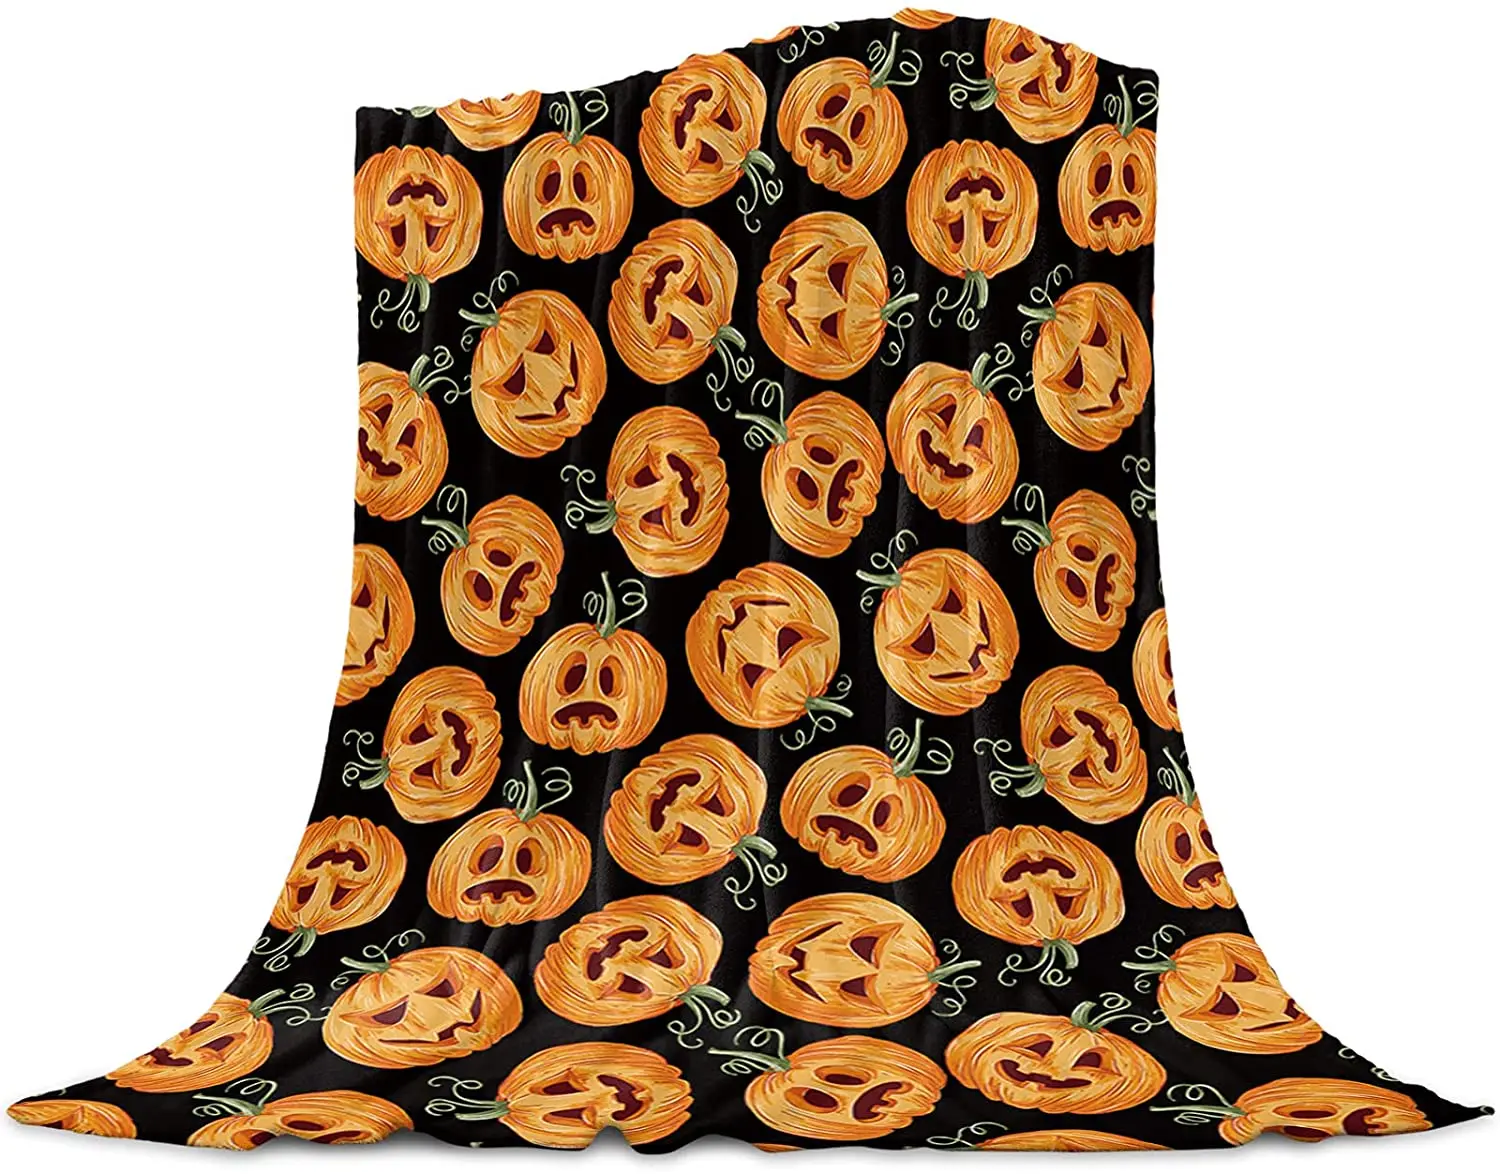 

Flannel Blankets and Throws for Couch Bed, Super Soft Cozy Lightweight Plush Throw Blanket,Halloween Theme Pumpkin Pattern